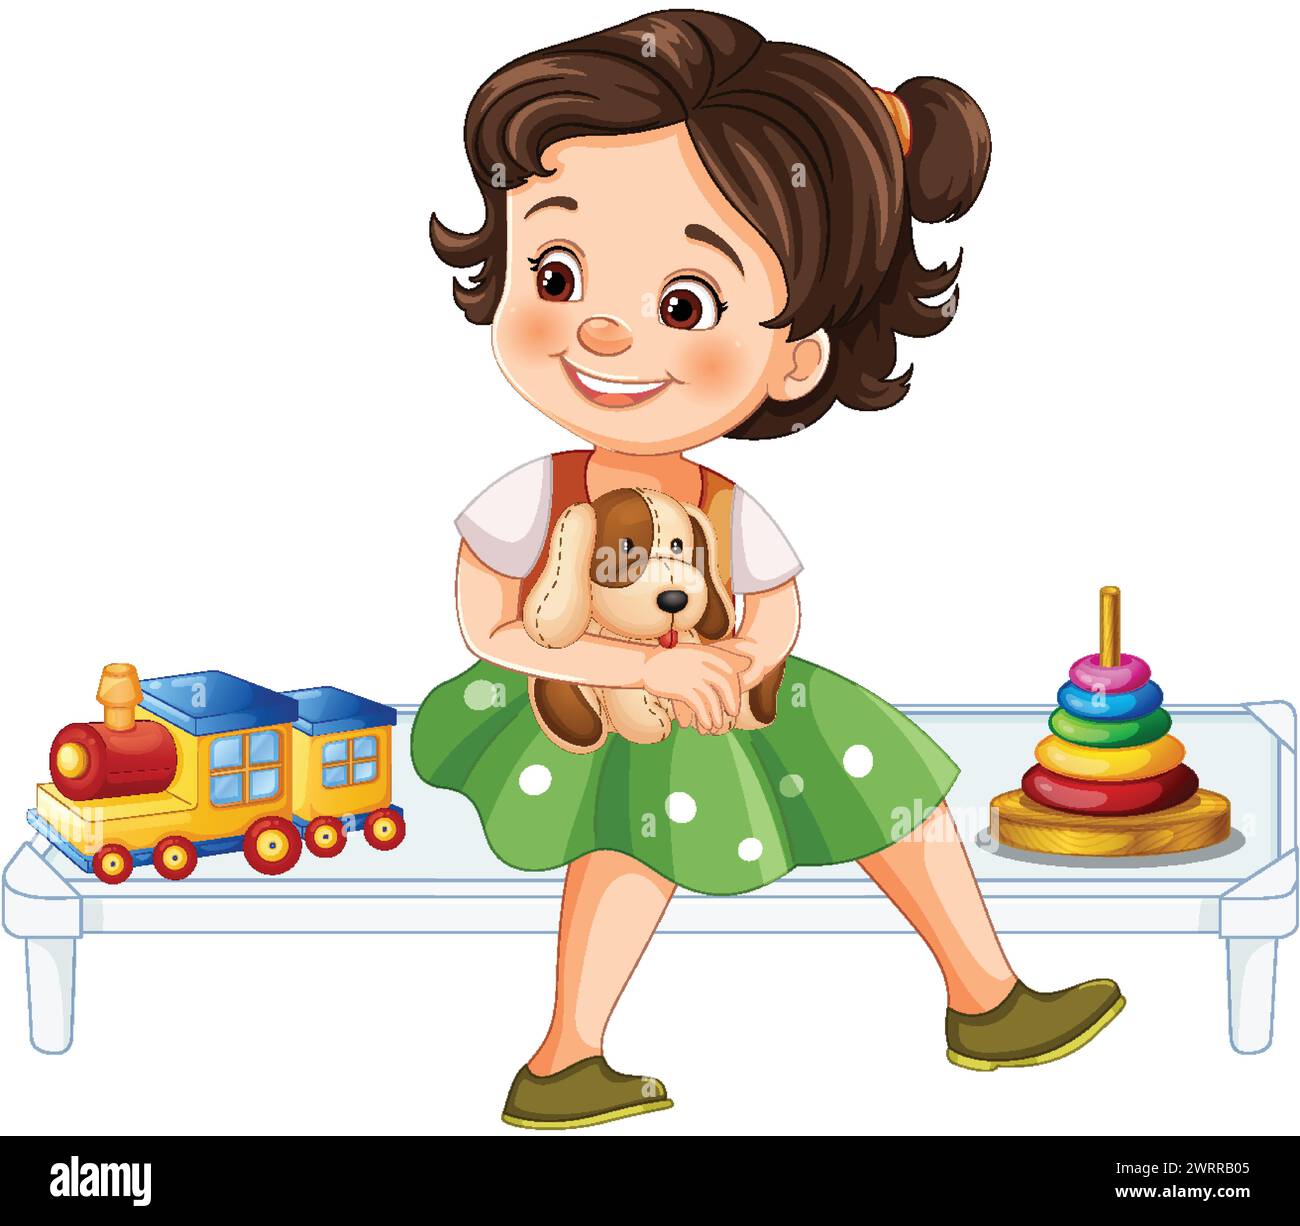 Smiling girl holding a puppy with toys nearby. Stock Vector